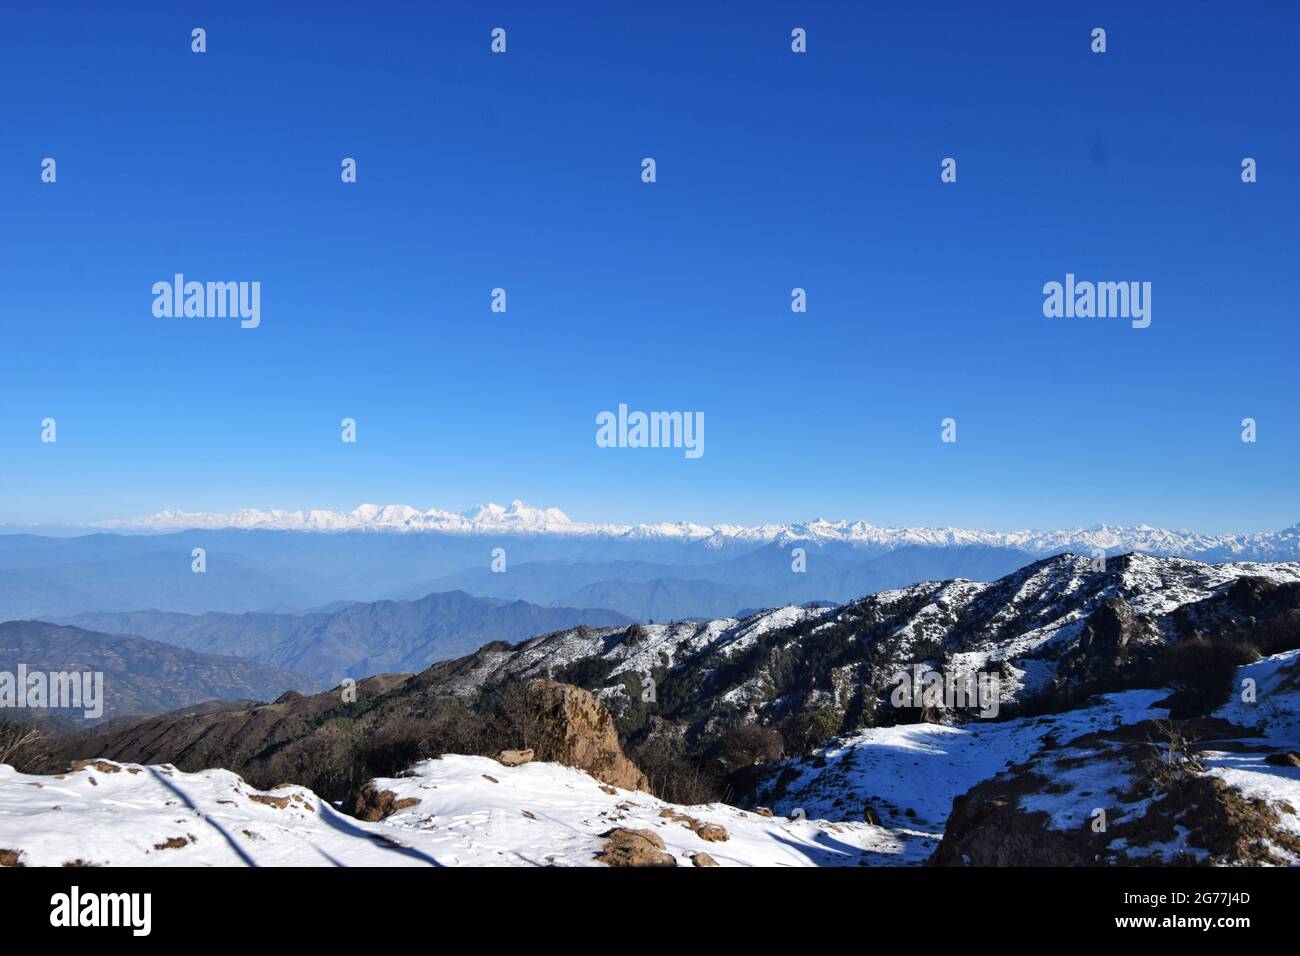 WORLD'S TOP MOUNTAINS IN ONE FRAME Stock Photo